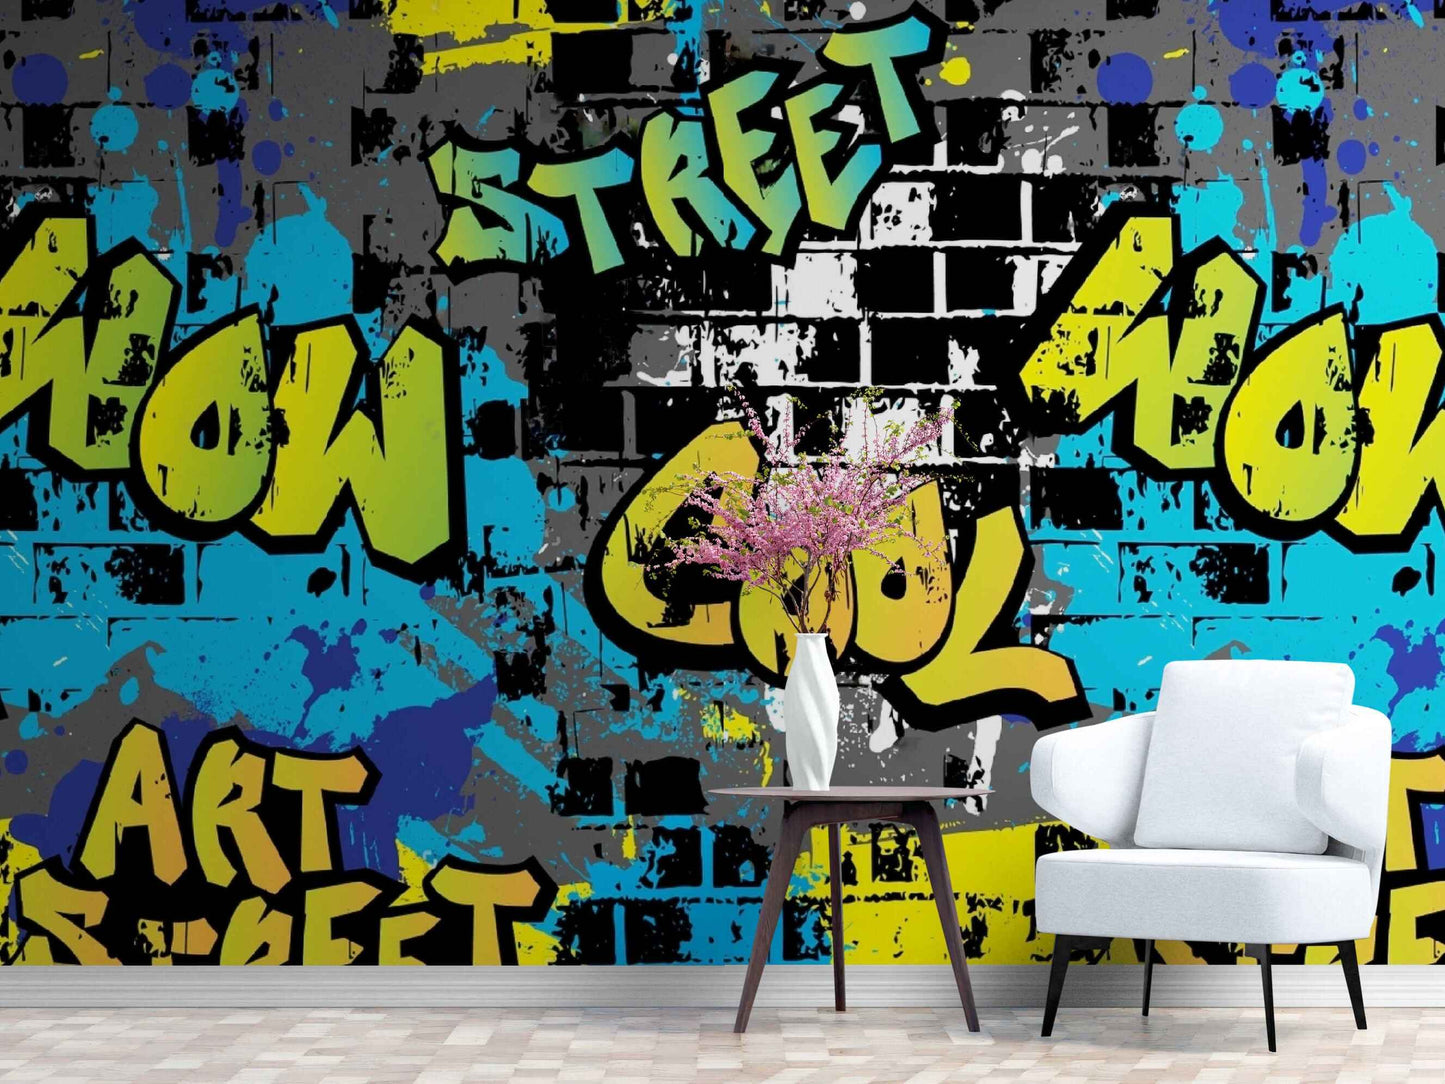 An image of a wallpaper with a street art graffiti design in various colors, including shades of blue, red, and yellow. The design features bold shapes, lines, and lettering, resembling traditional graffiti art. The wallpaper is available from the Accent Wallpapers Shop, a retailer specializing in unique and creative wall coverings. The wallpaper is suitable for accent walls in any room, adding a touch of urban and artistic vibe to the decor.